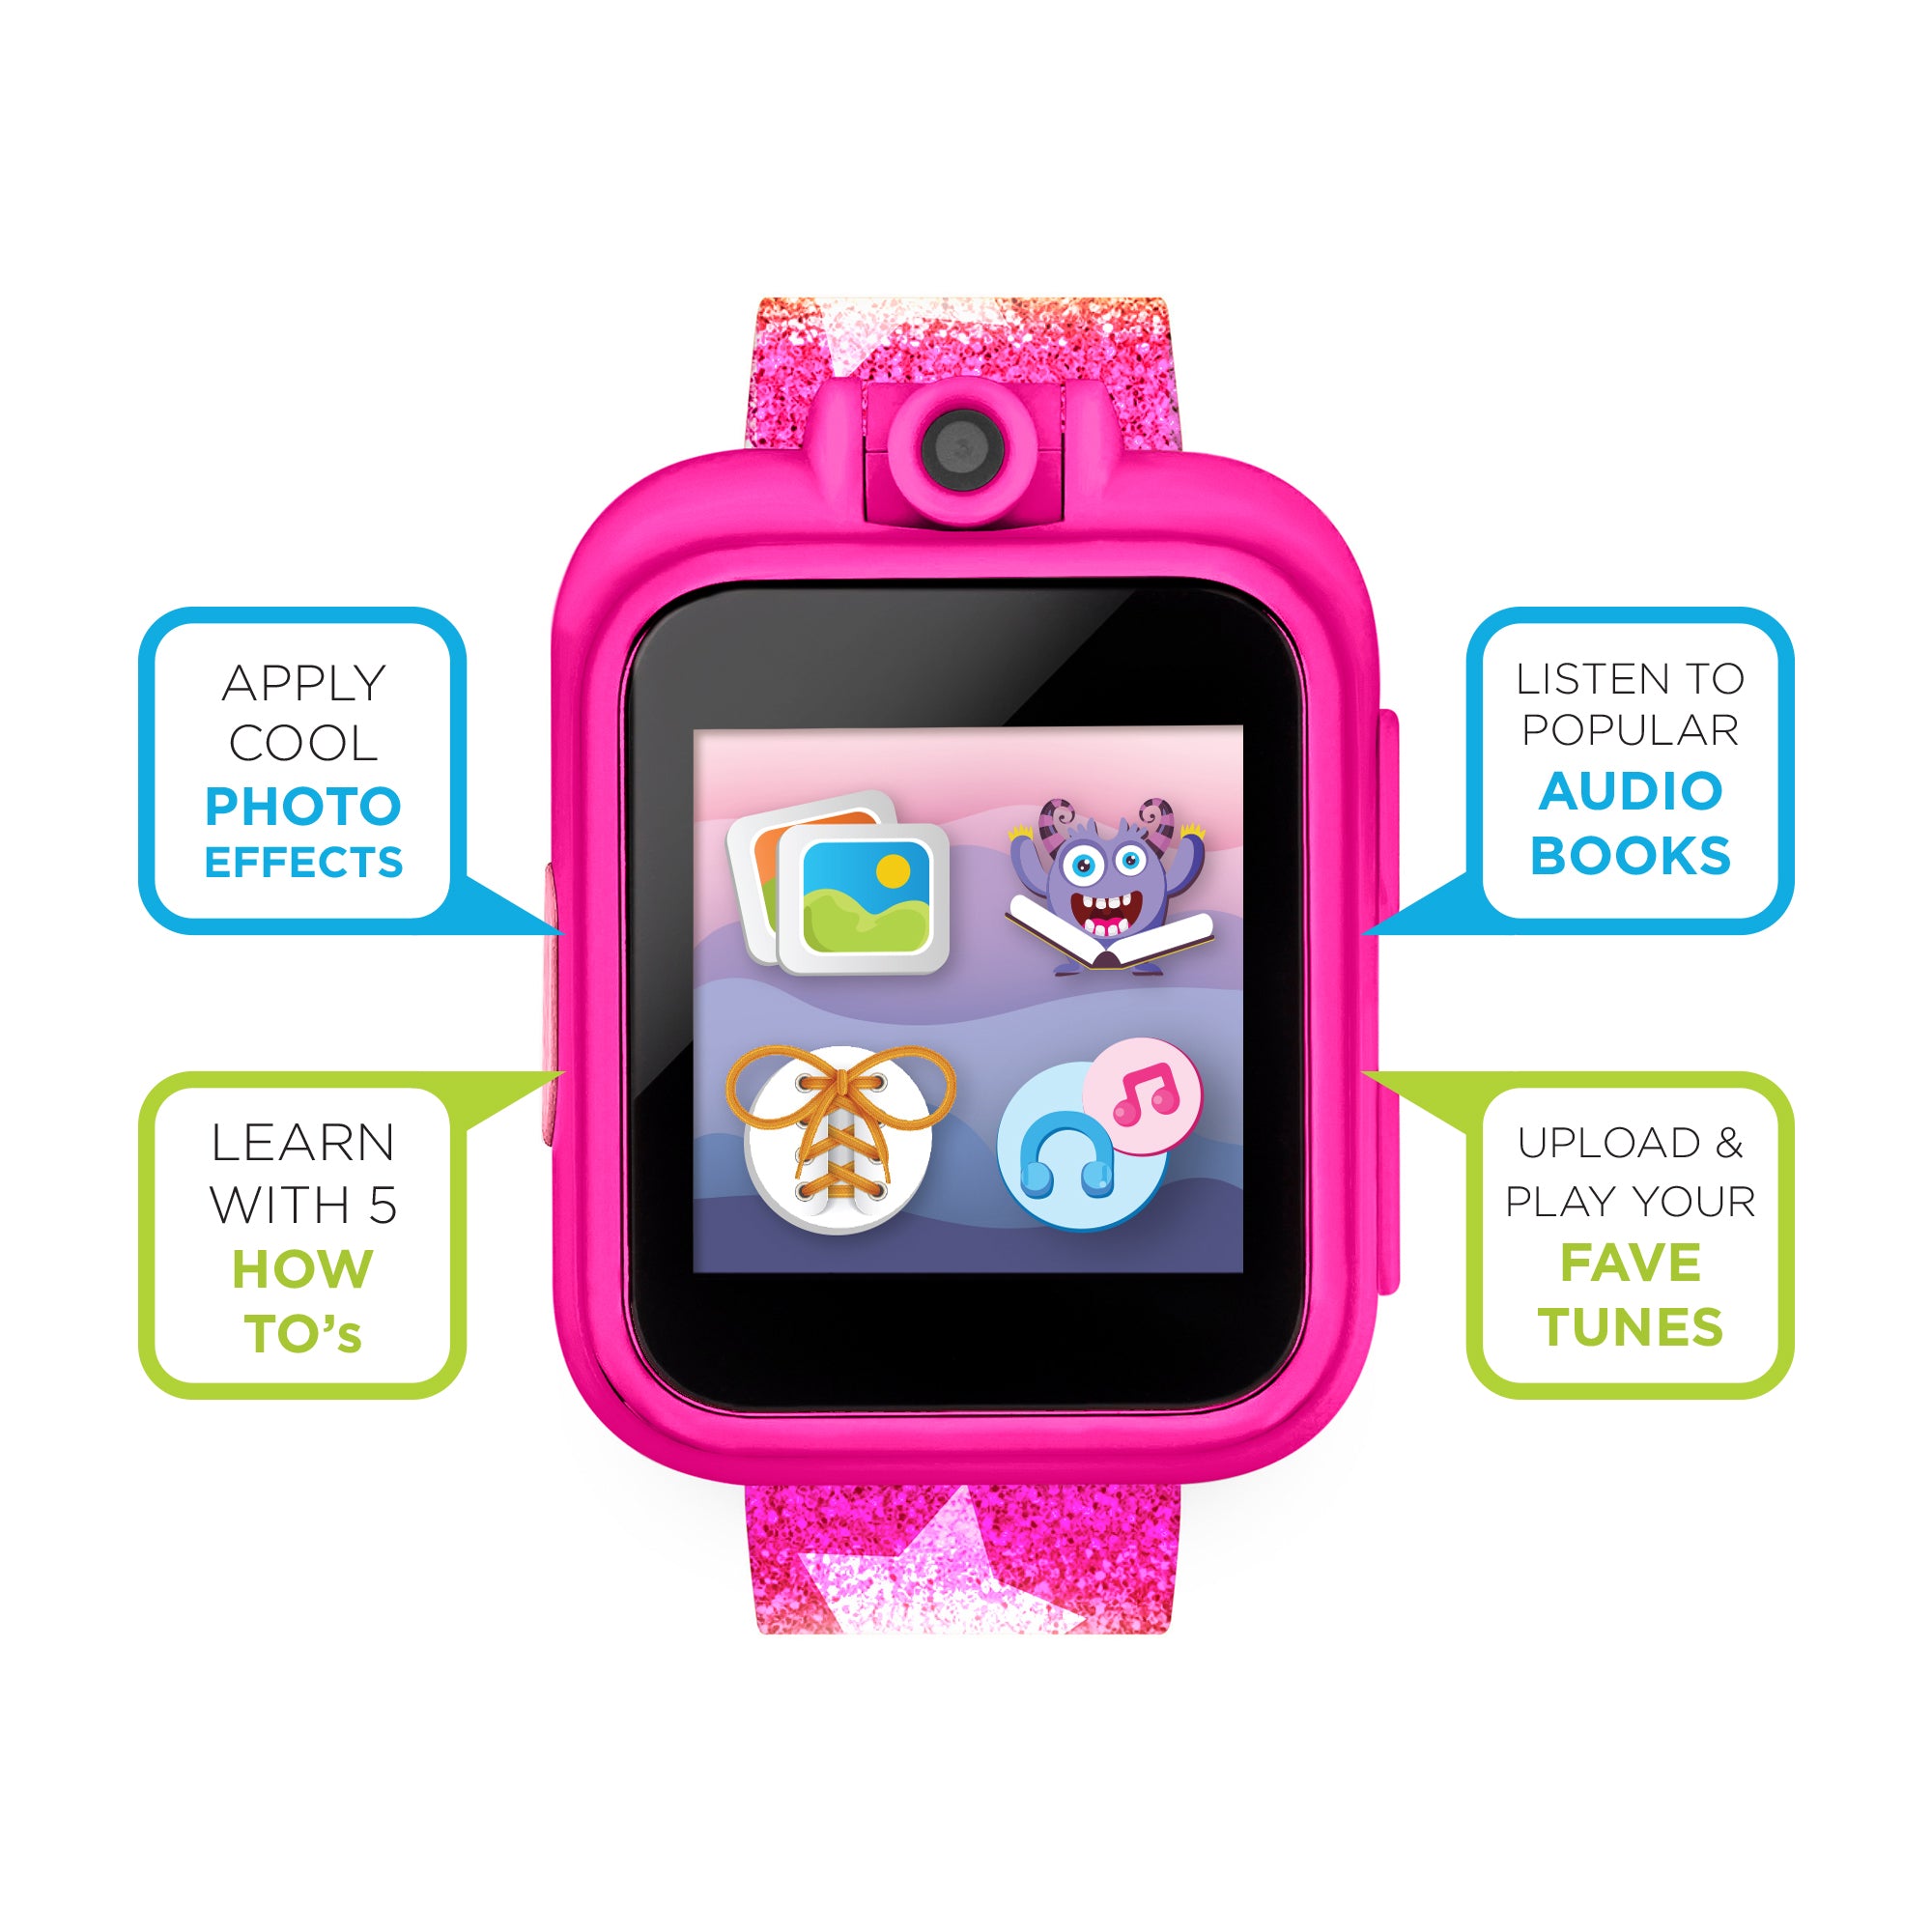 PlayZoom 2 Kids Smartwatch with Headphones: Rainbow Star Print affordable smart watch with headphones